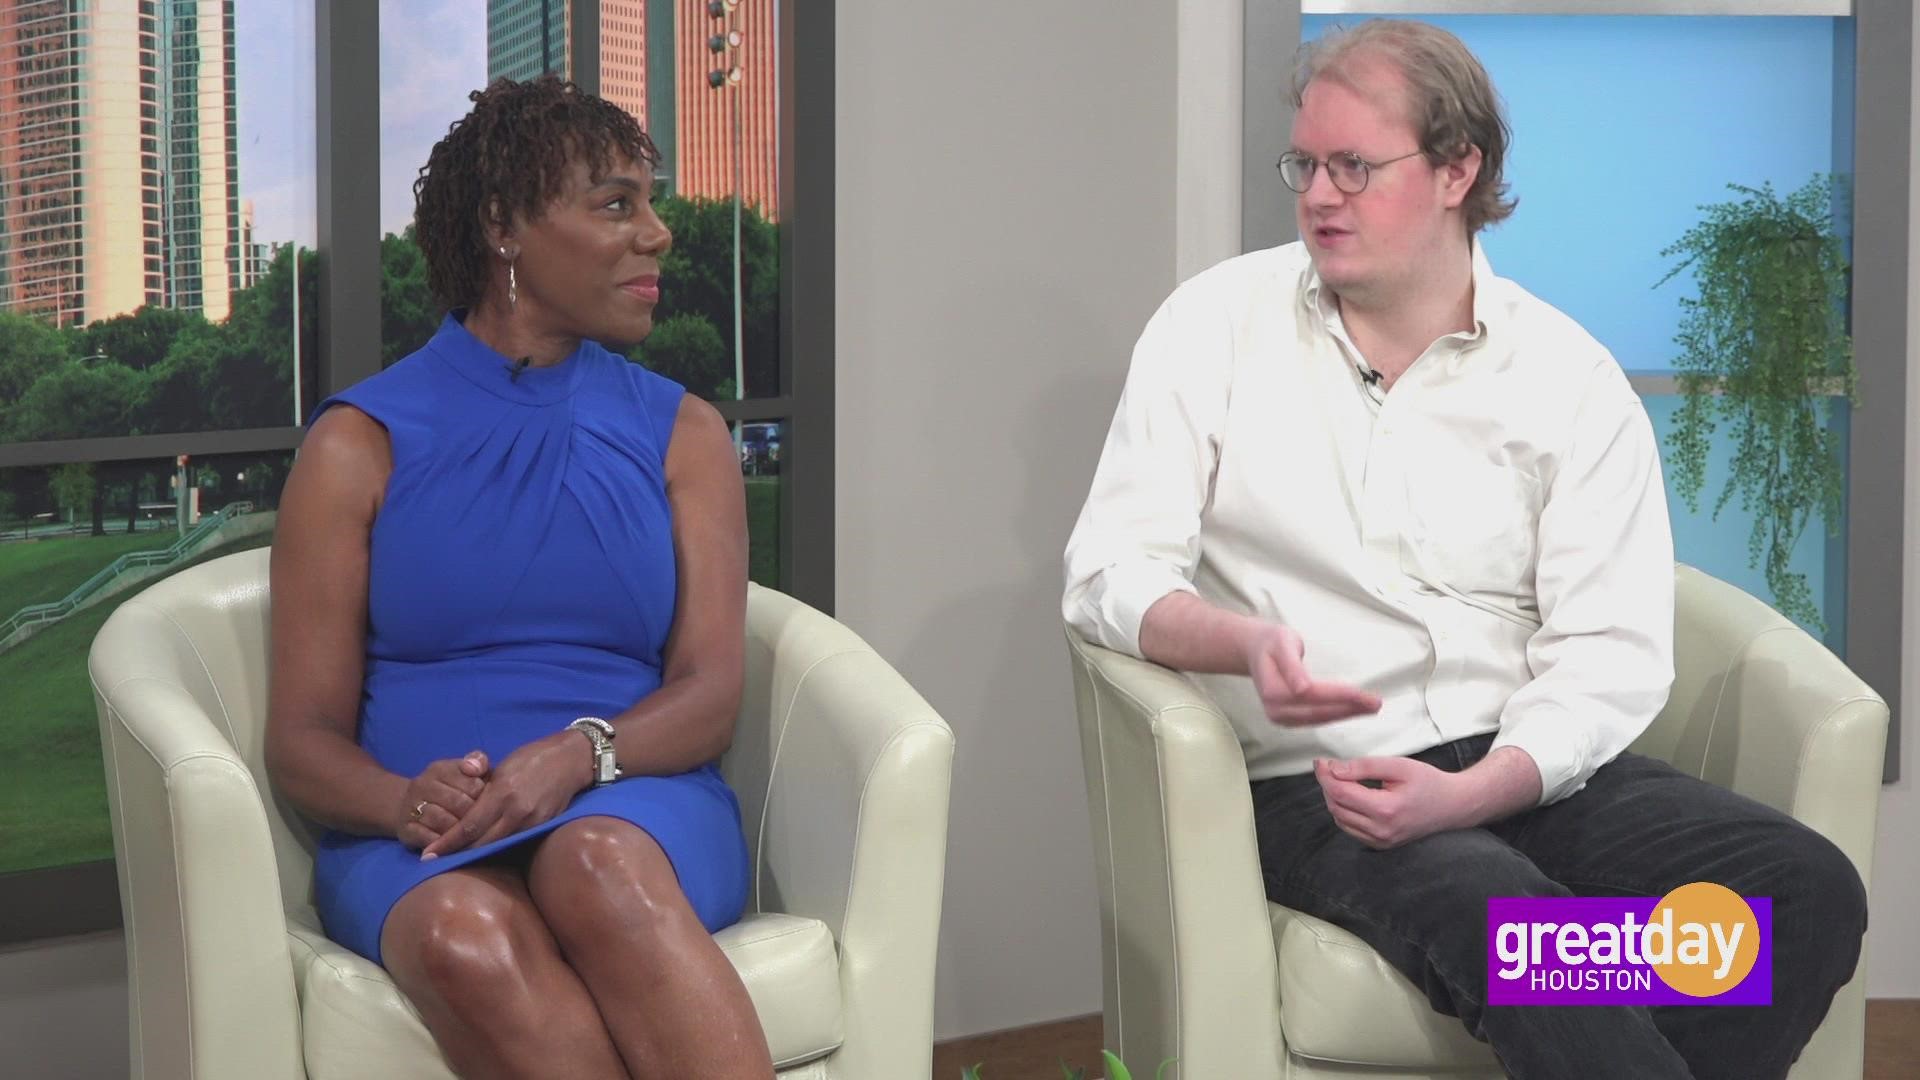 Founder of Akili's corner, Akili Atkinson, and her mentee, Charlie Pierce, join us to share how it's helping autistic job seekers and employers to thrive!